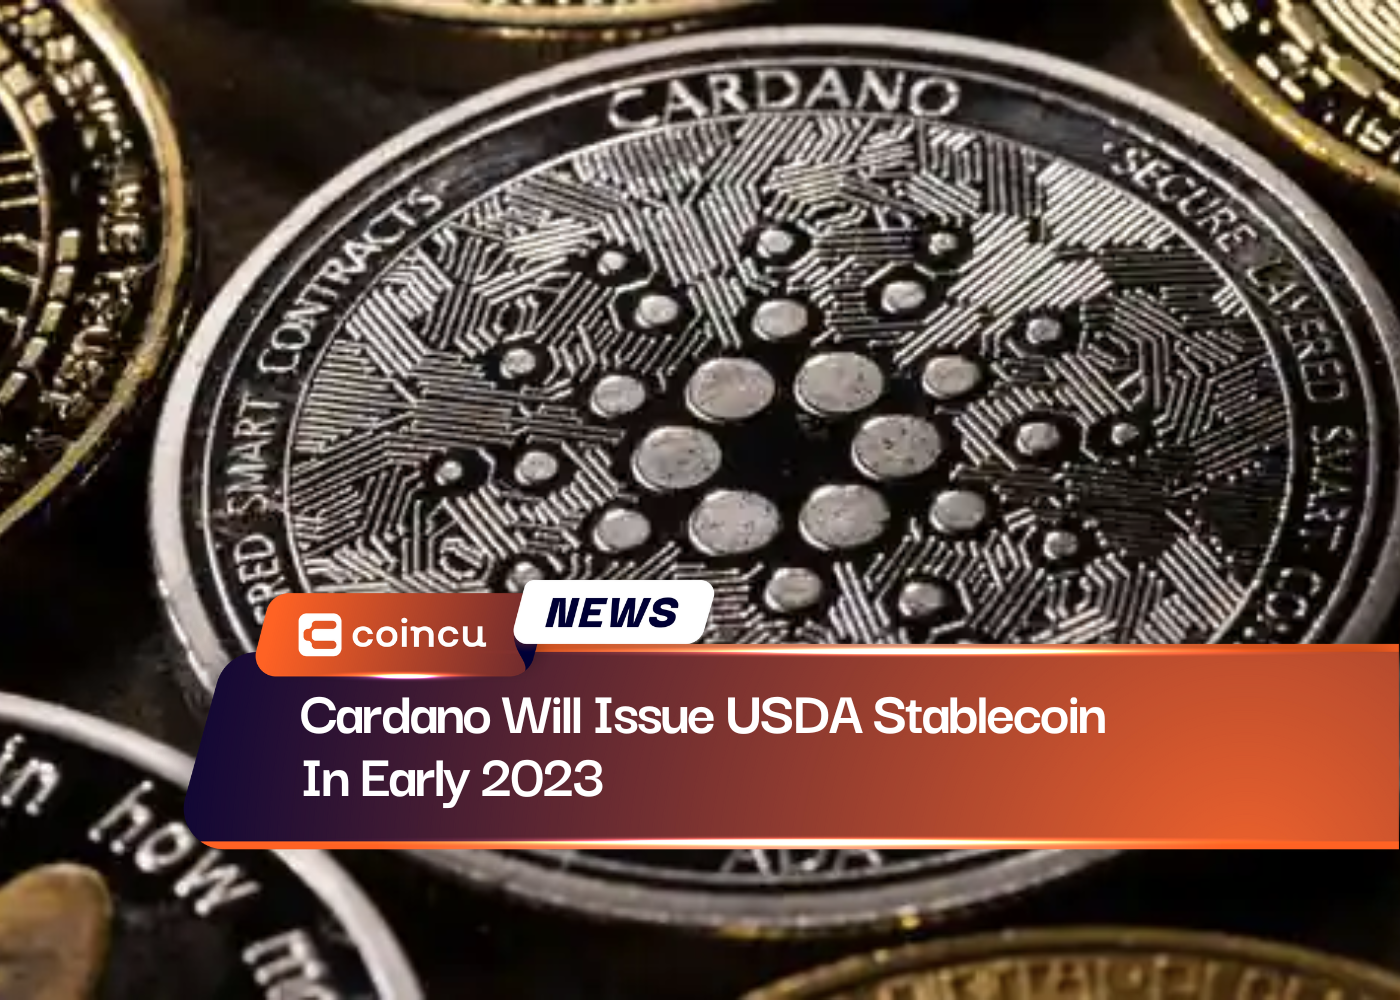 Cardano Will Issue USDA Stablecoin In Early 2023